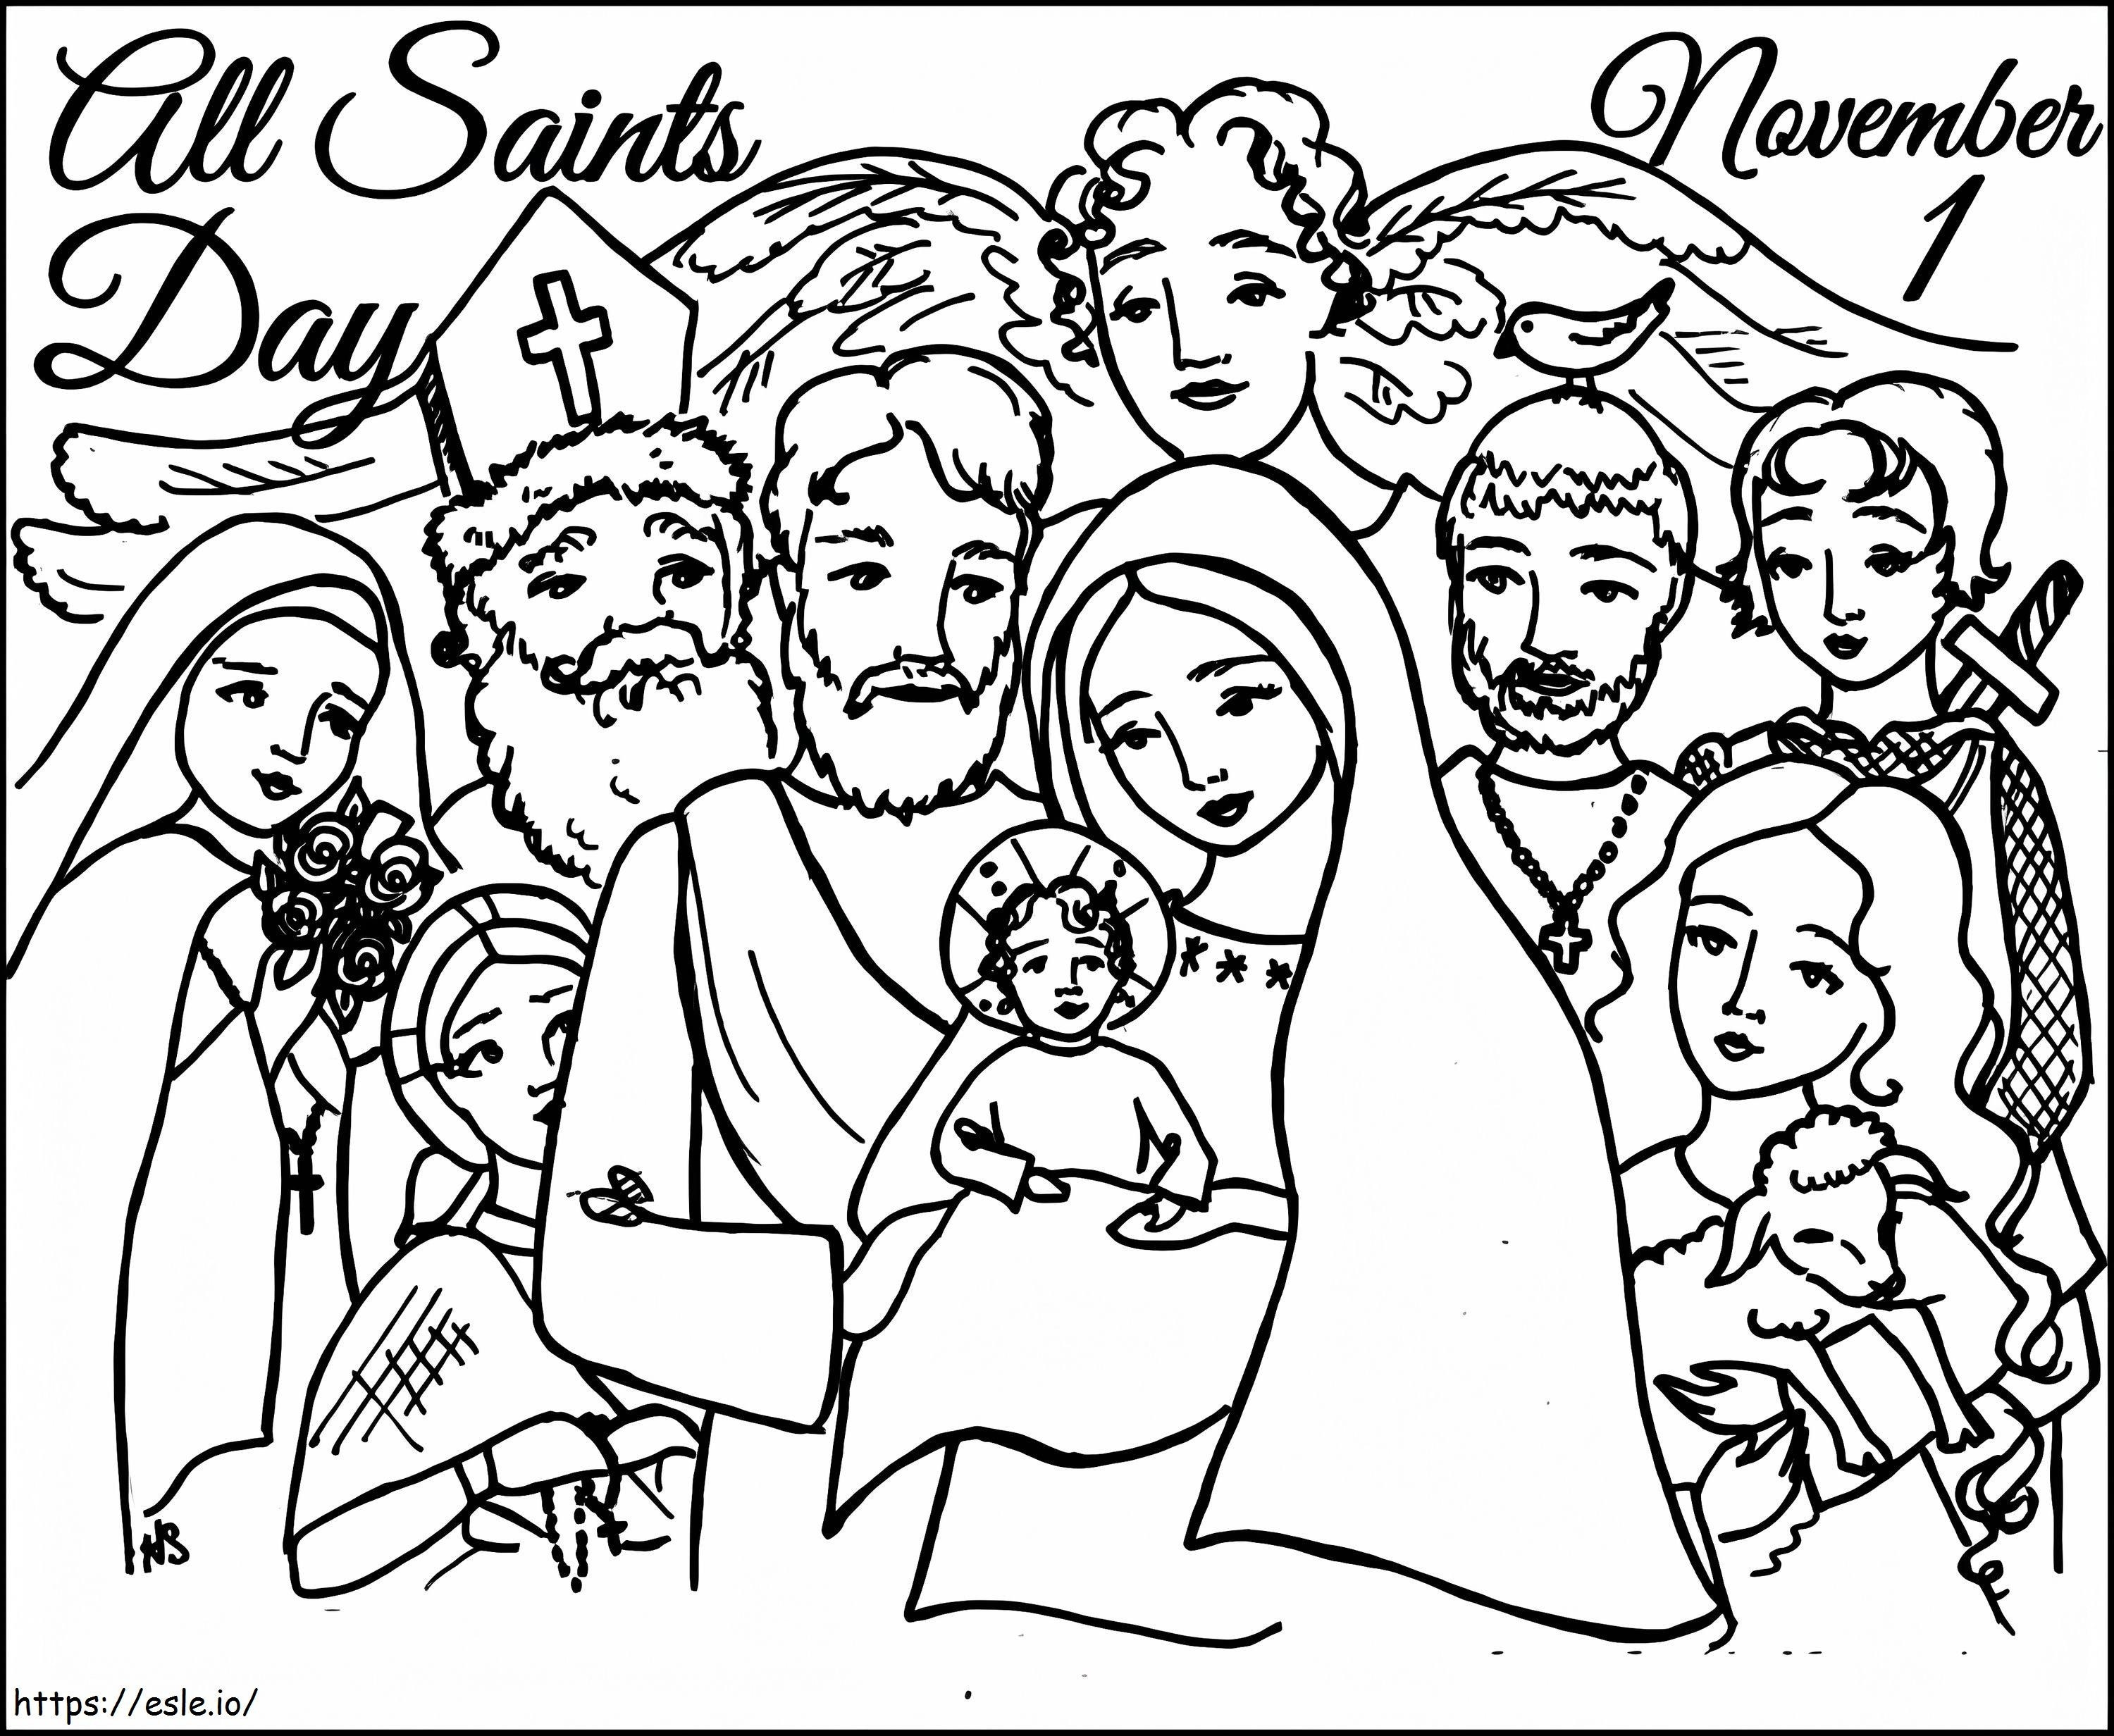 All Saints Day 1 coloring page